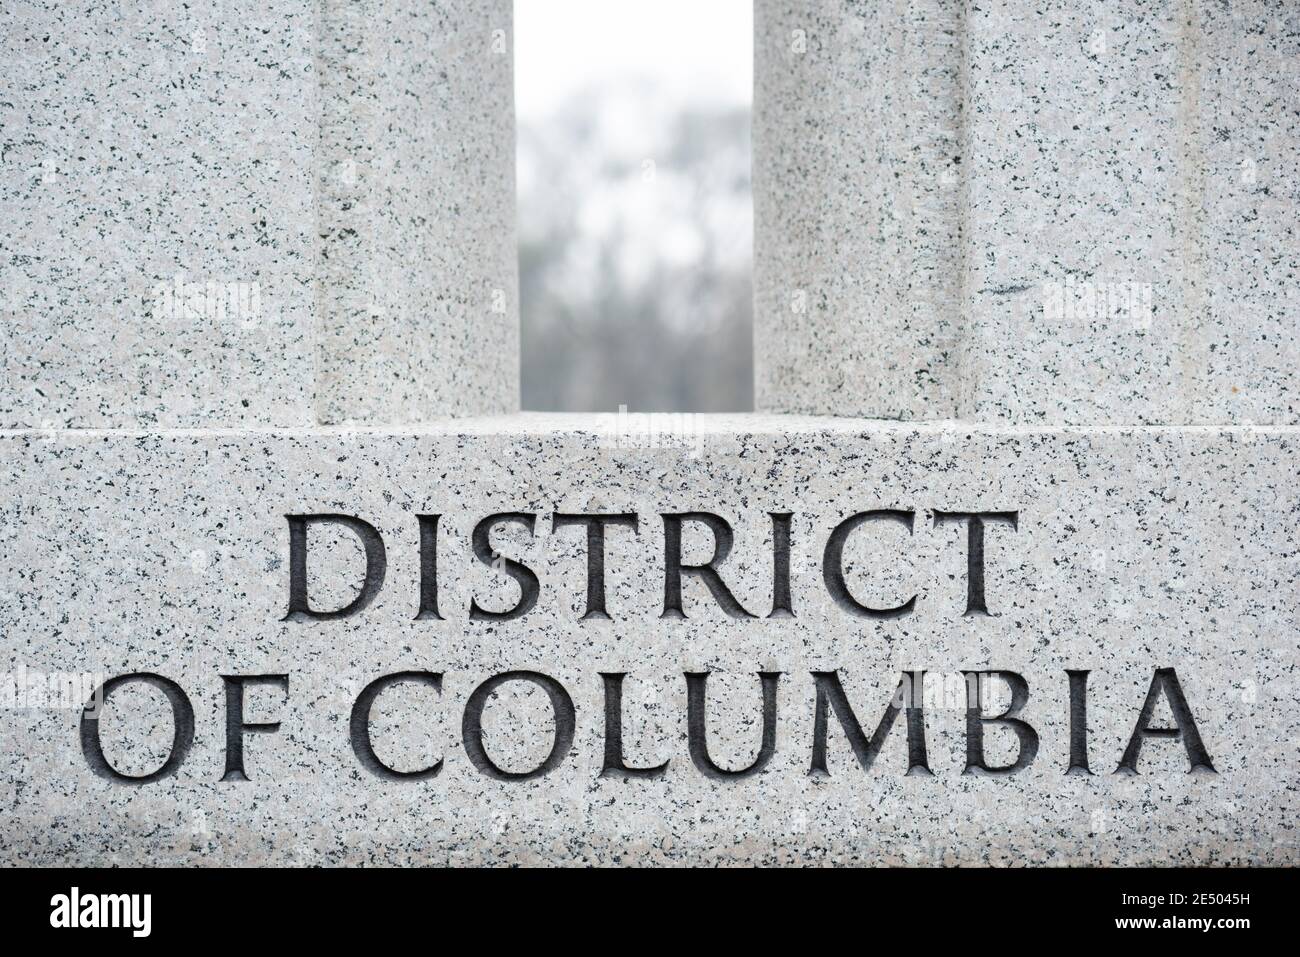 District of Columbia engraved  on the WWII memorial in DC. Stock Photo